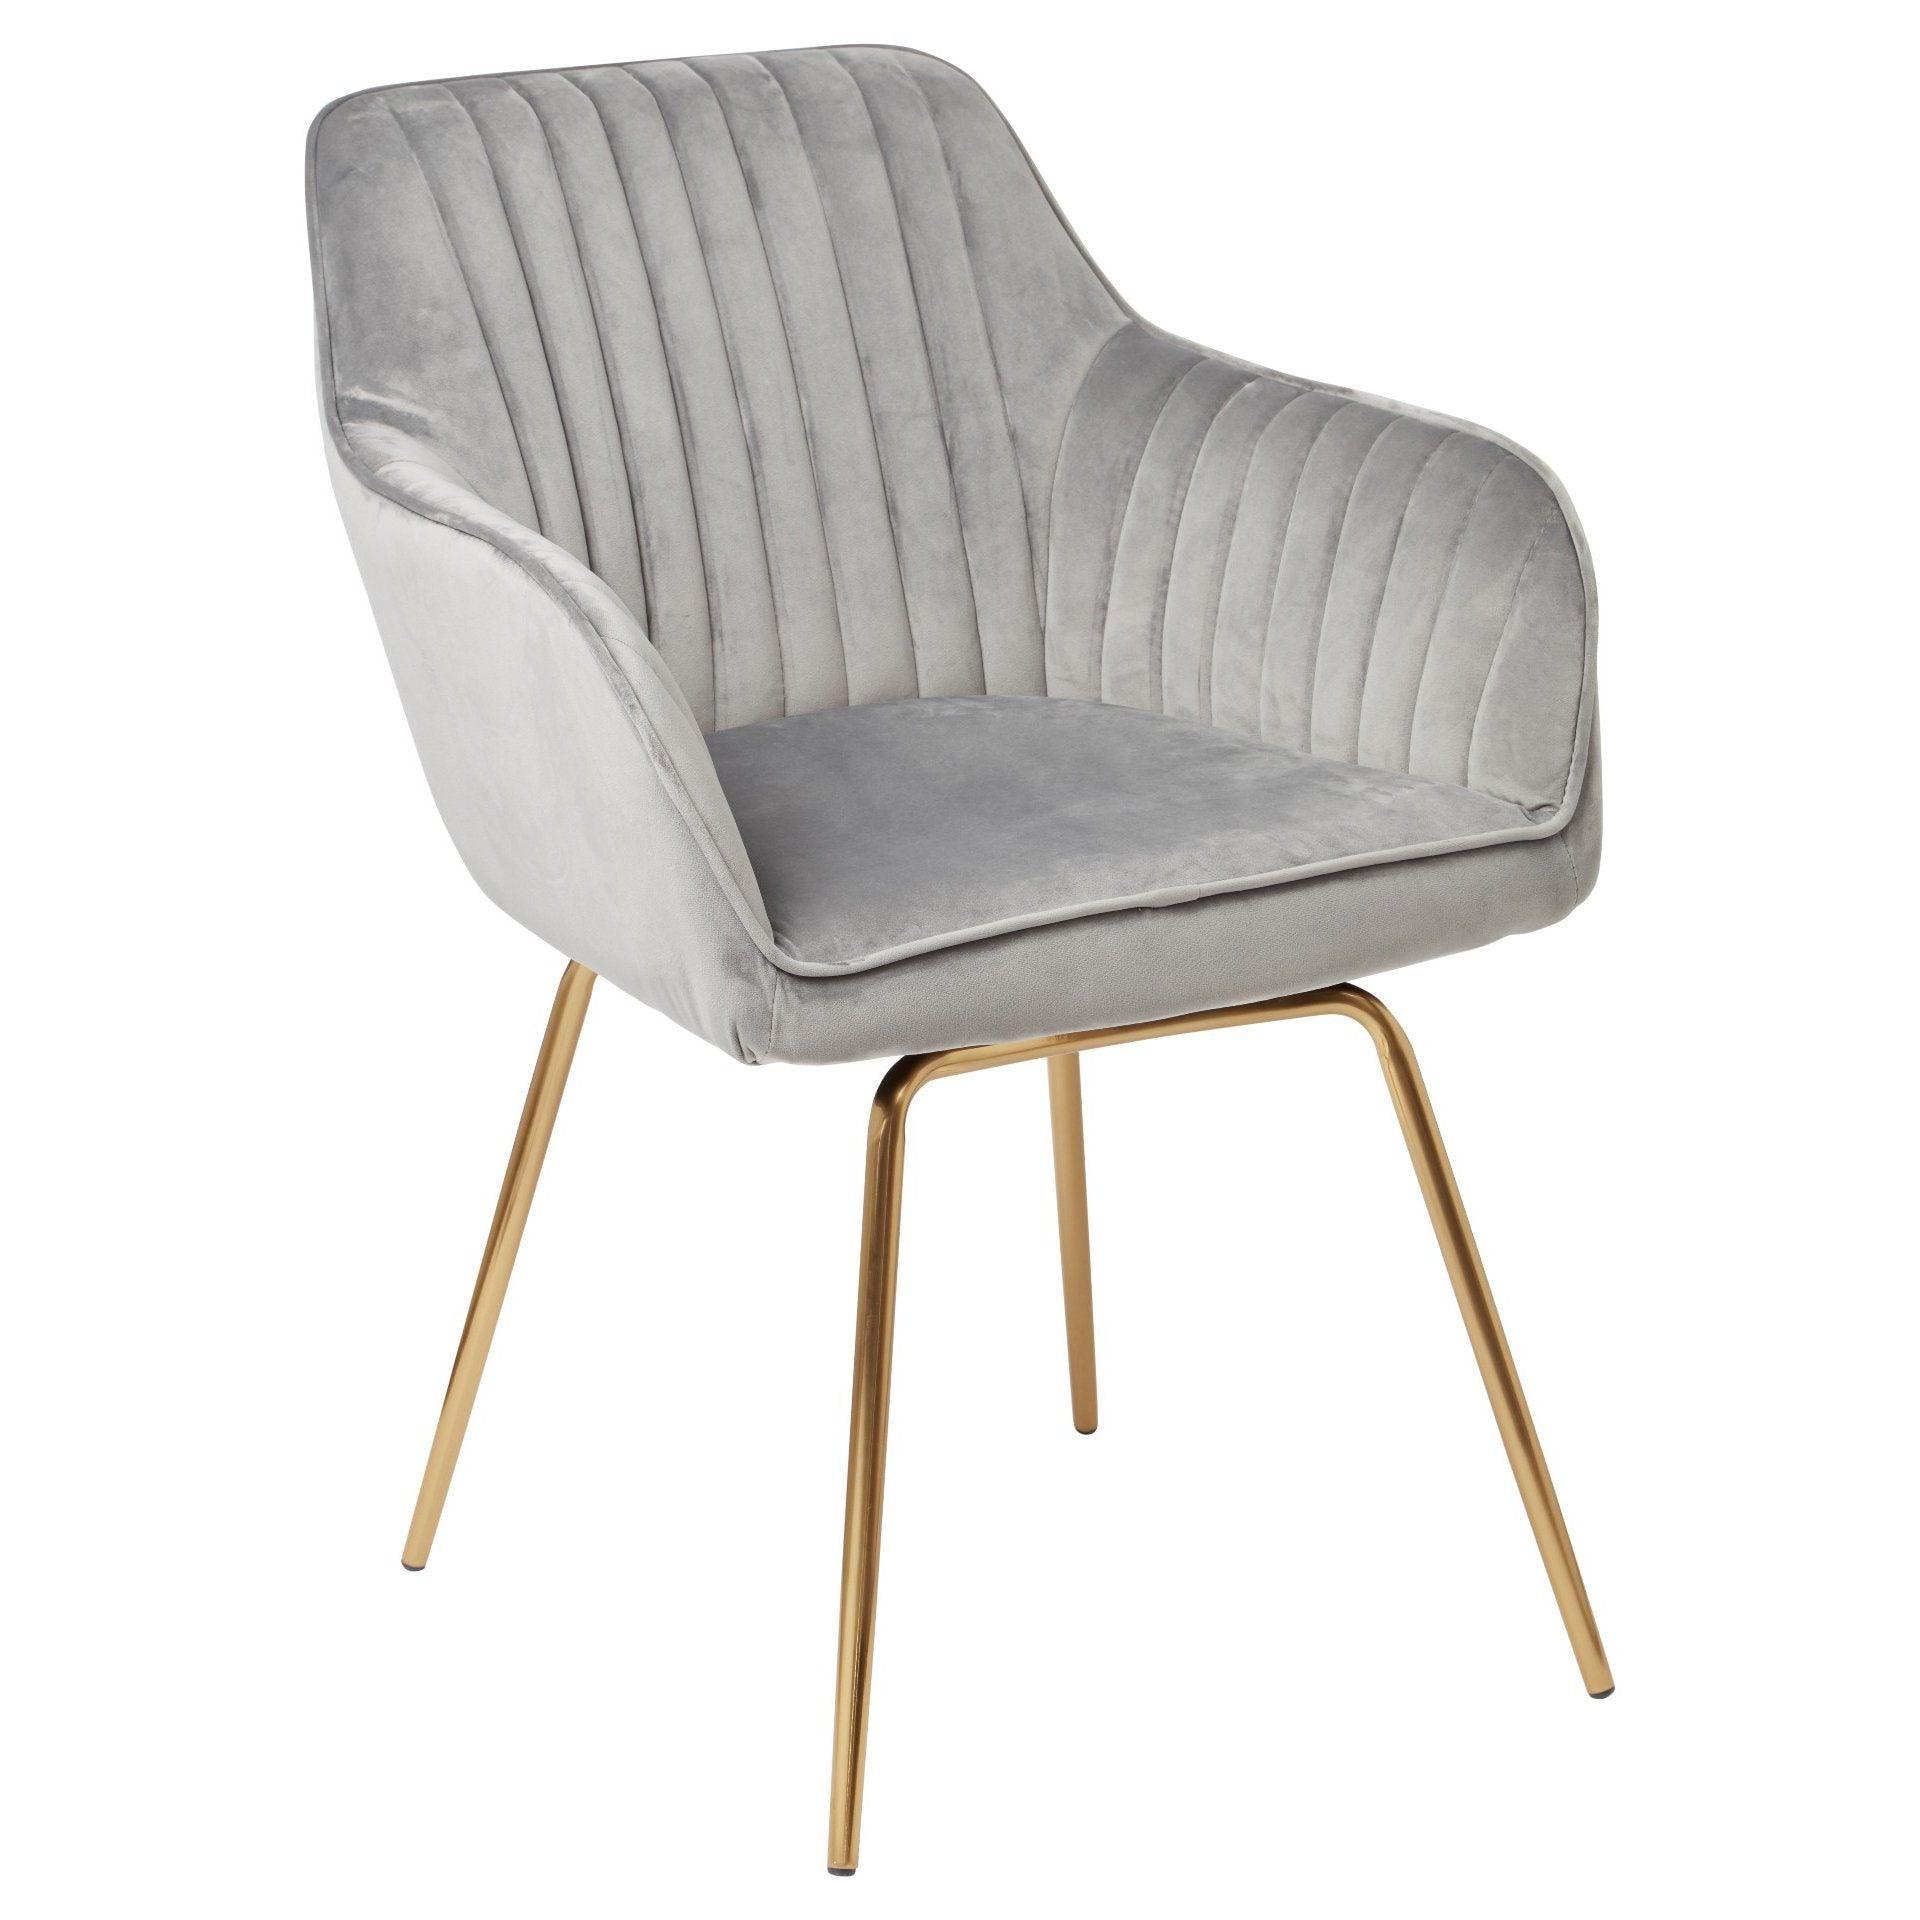 Darcy swivel chair - velvet - grey and gold - Laura James